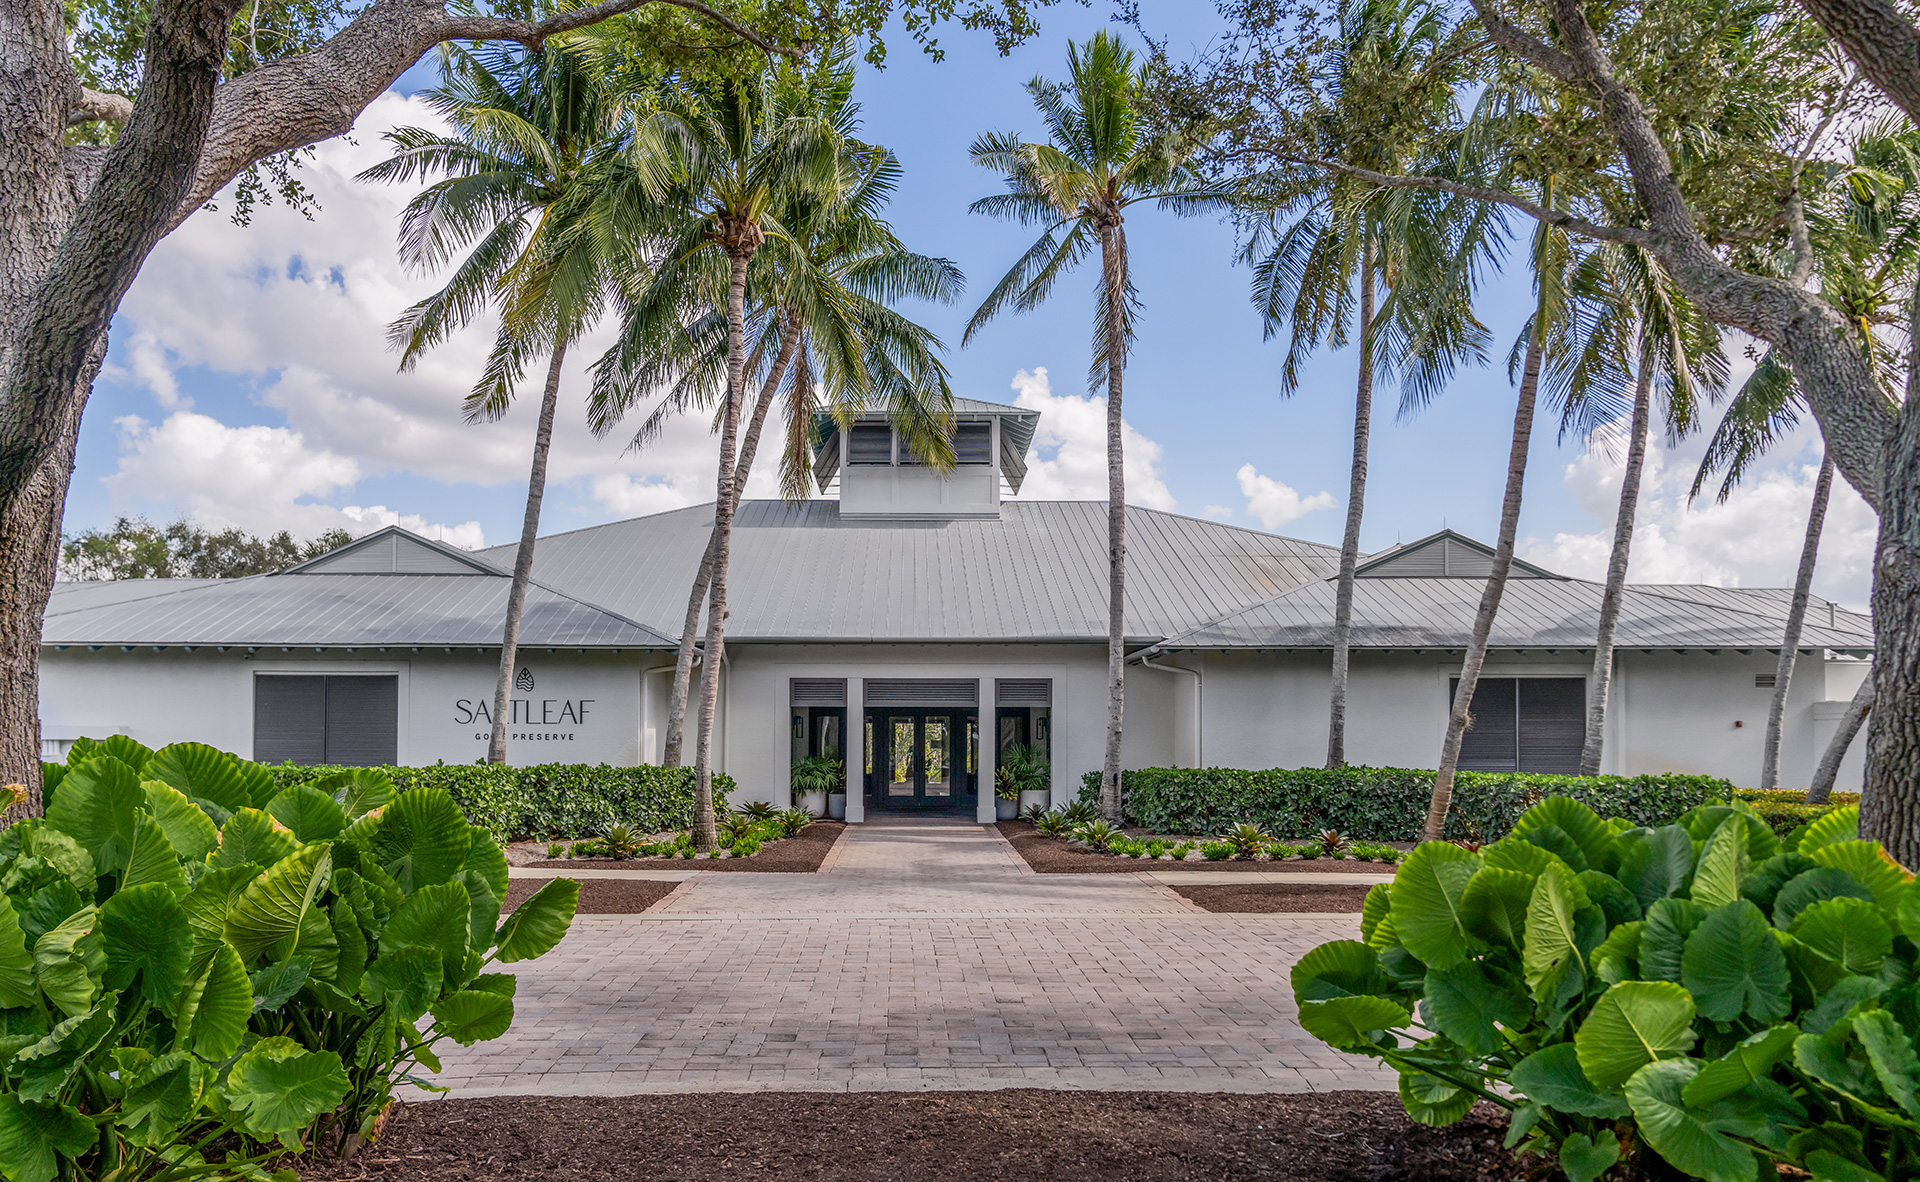 The entrance to the Saltleaf Golf Preserve, a white building with palm trees, located in Bonita Springs.